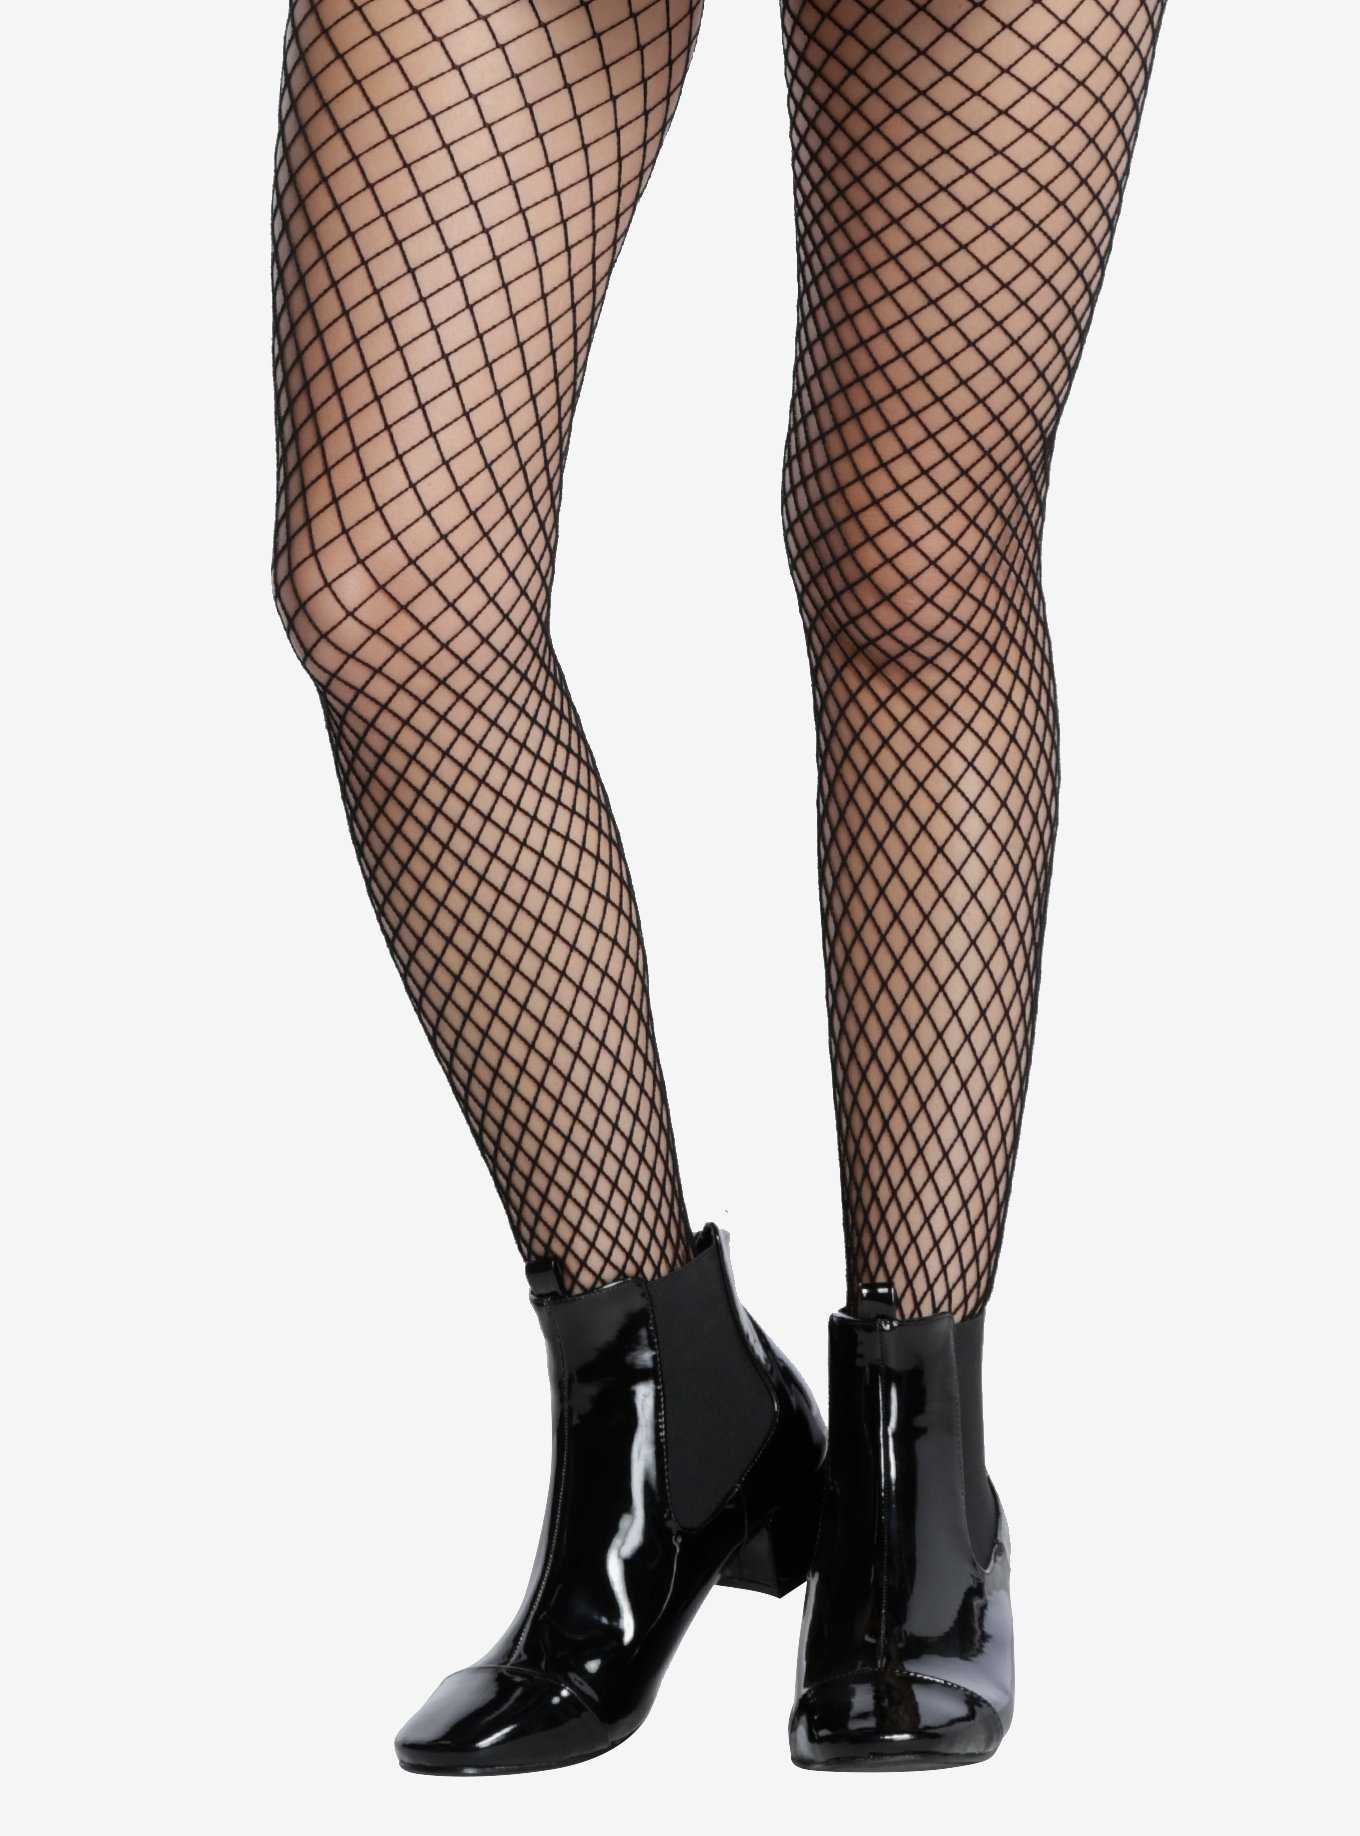  Leg Avenue Women's Dark Alternative Animal Fishnet Tights,  Butterfly, One Size US: Clothing, Shoes & Jewelry